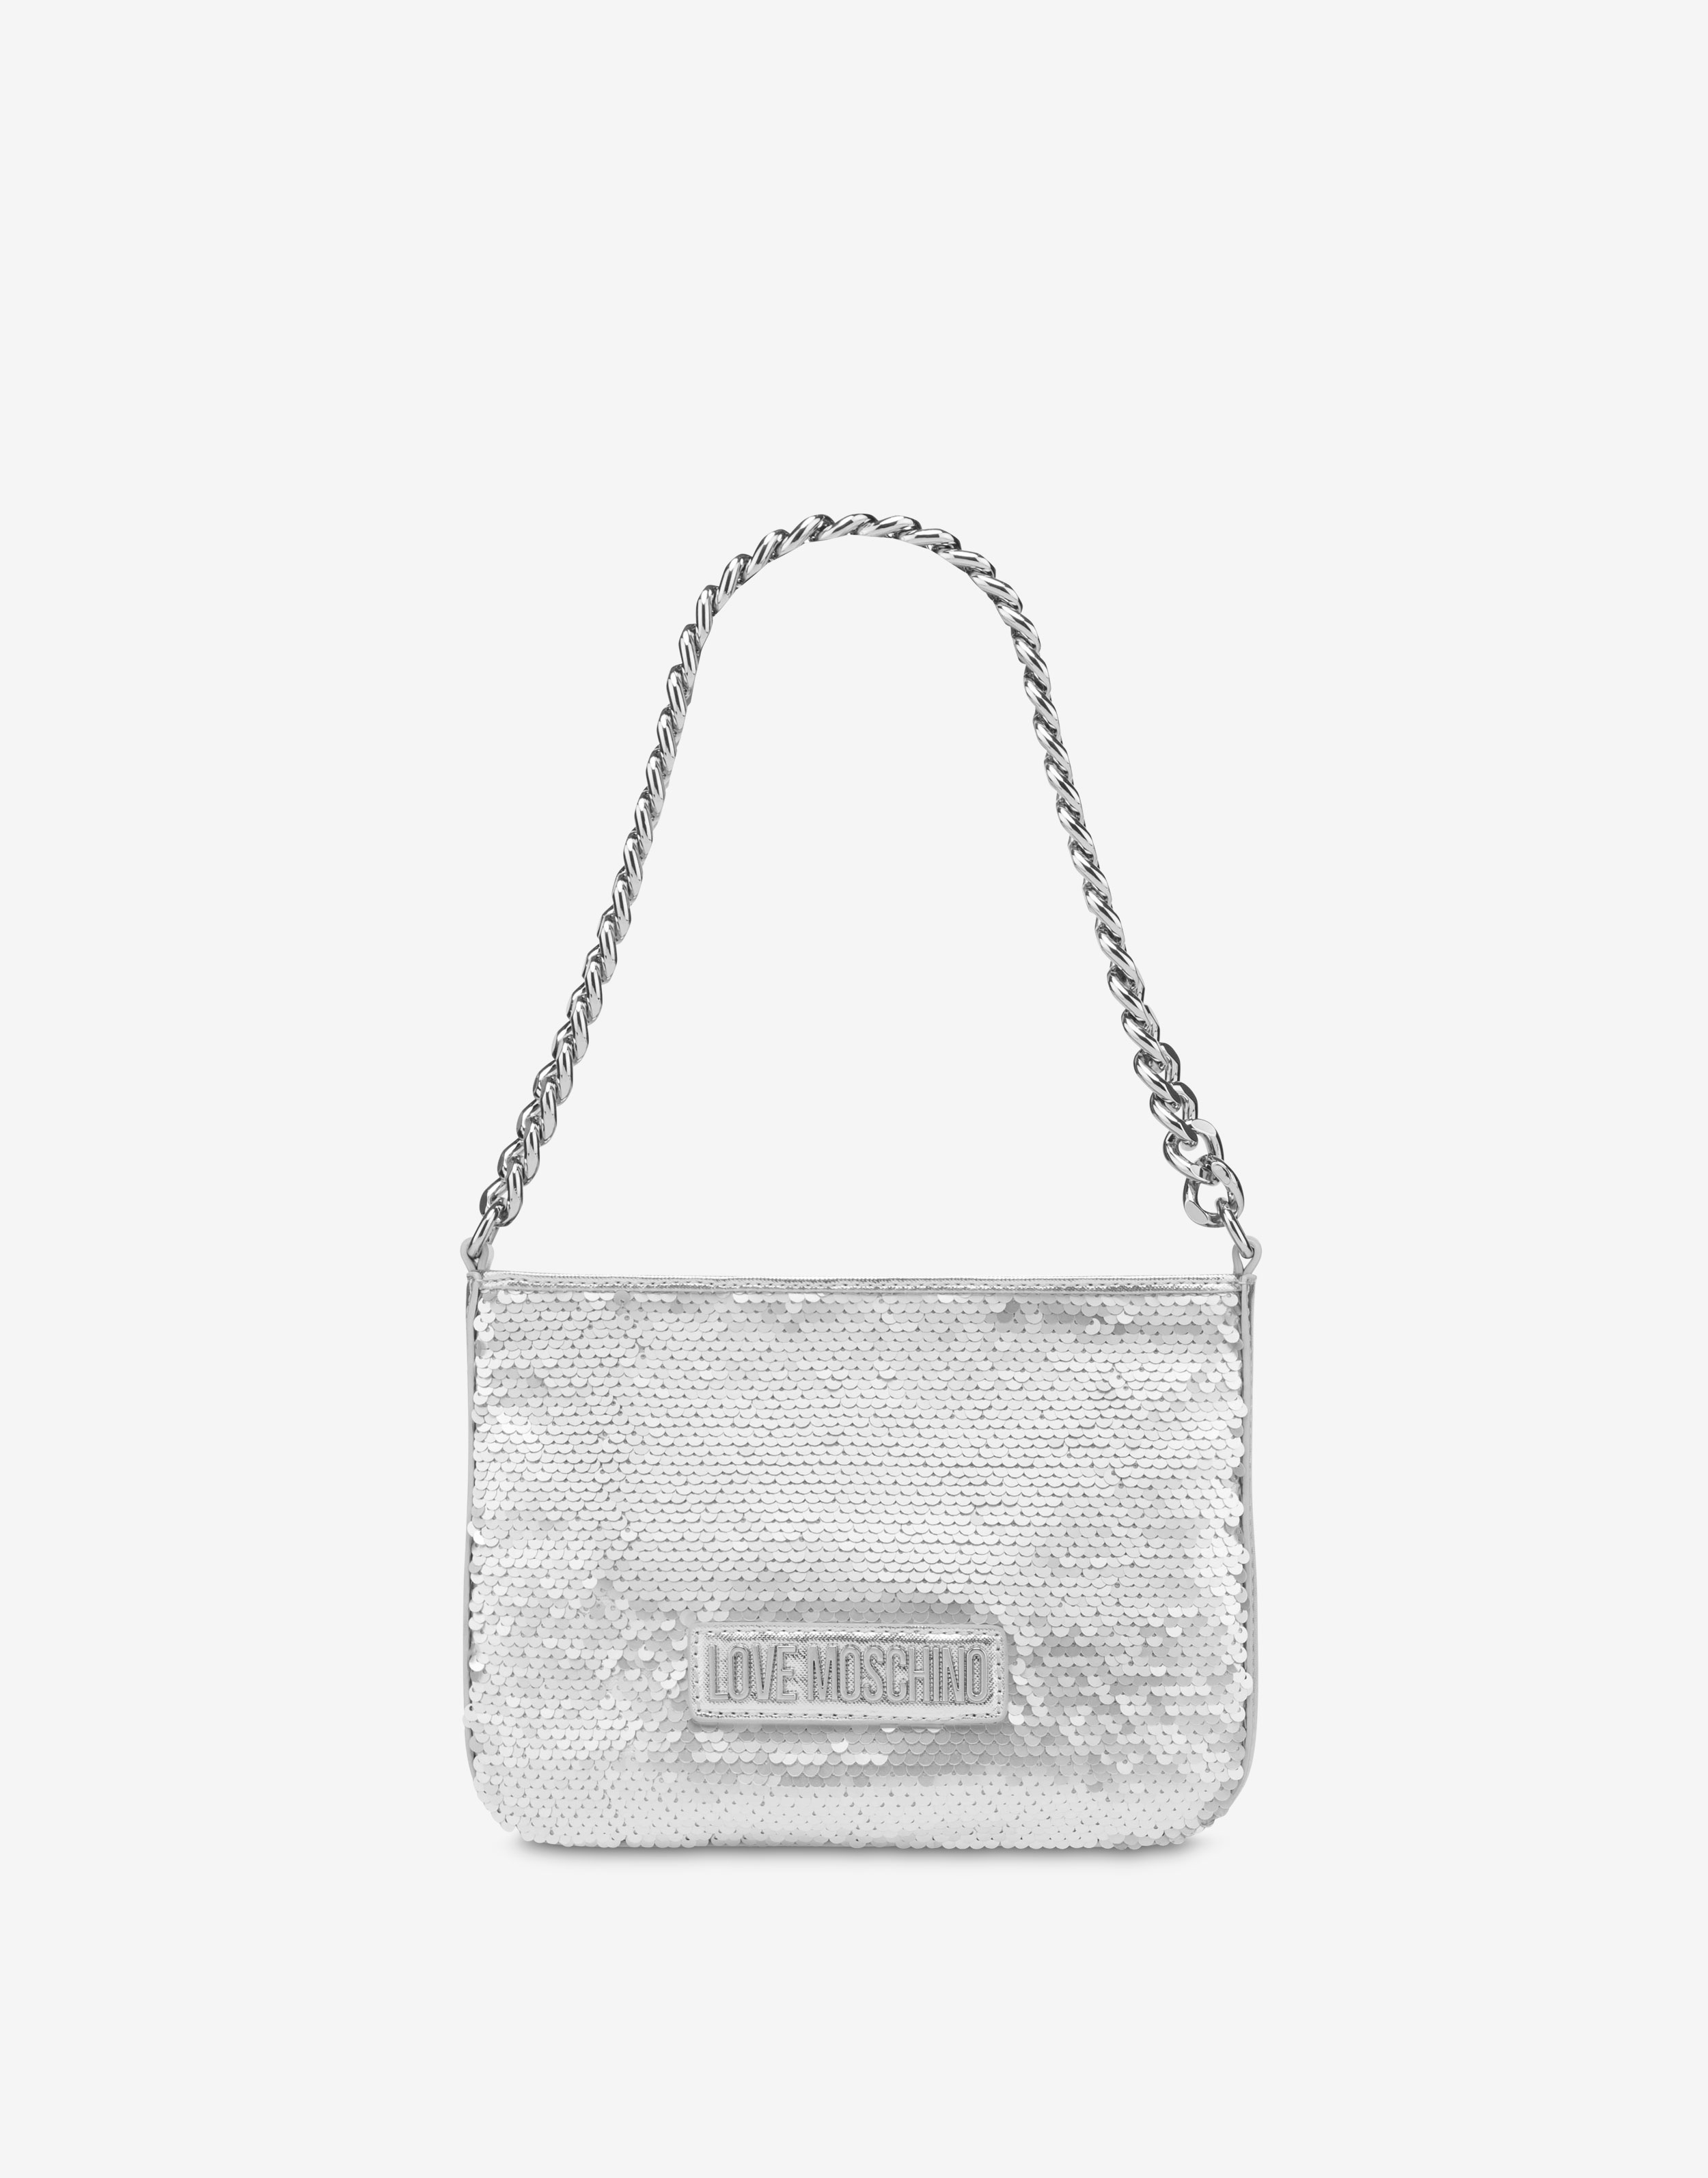 Women's Silver Bags, Explore our New Arrivals